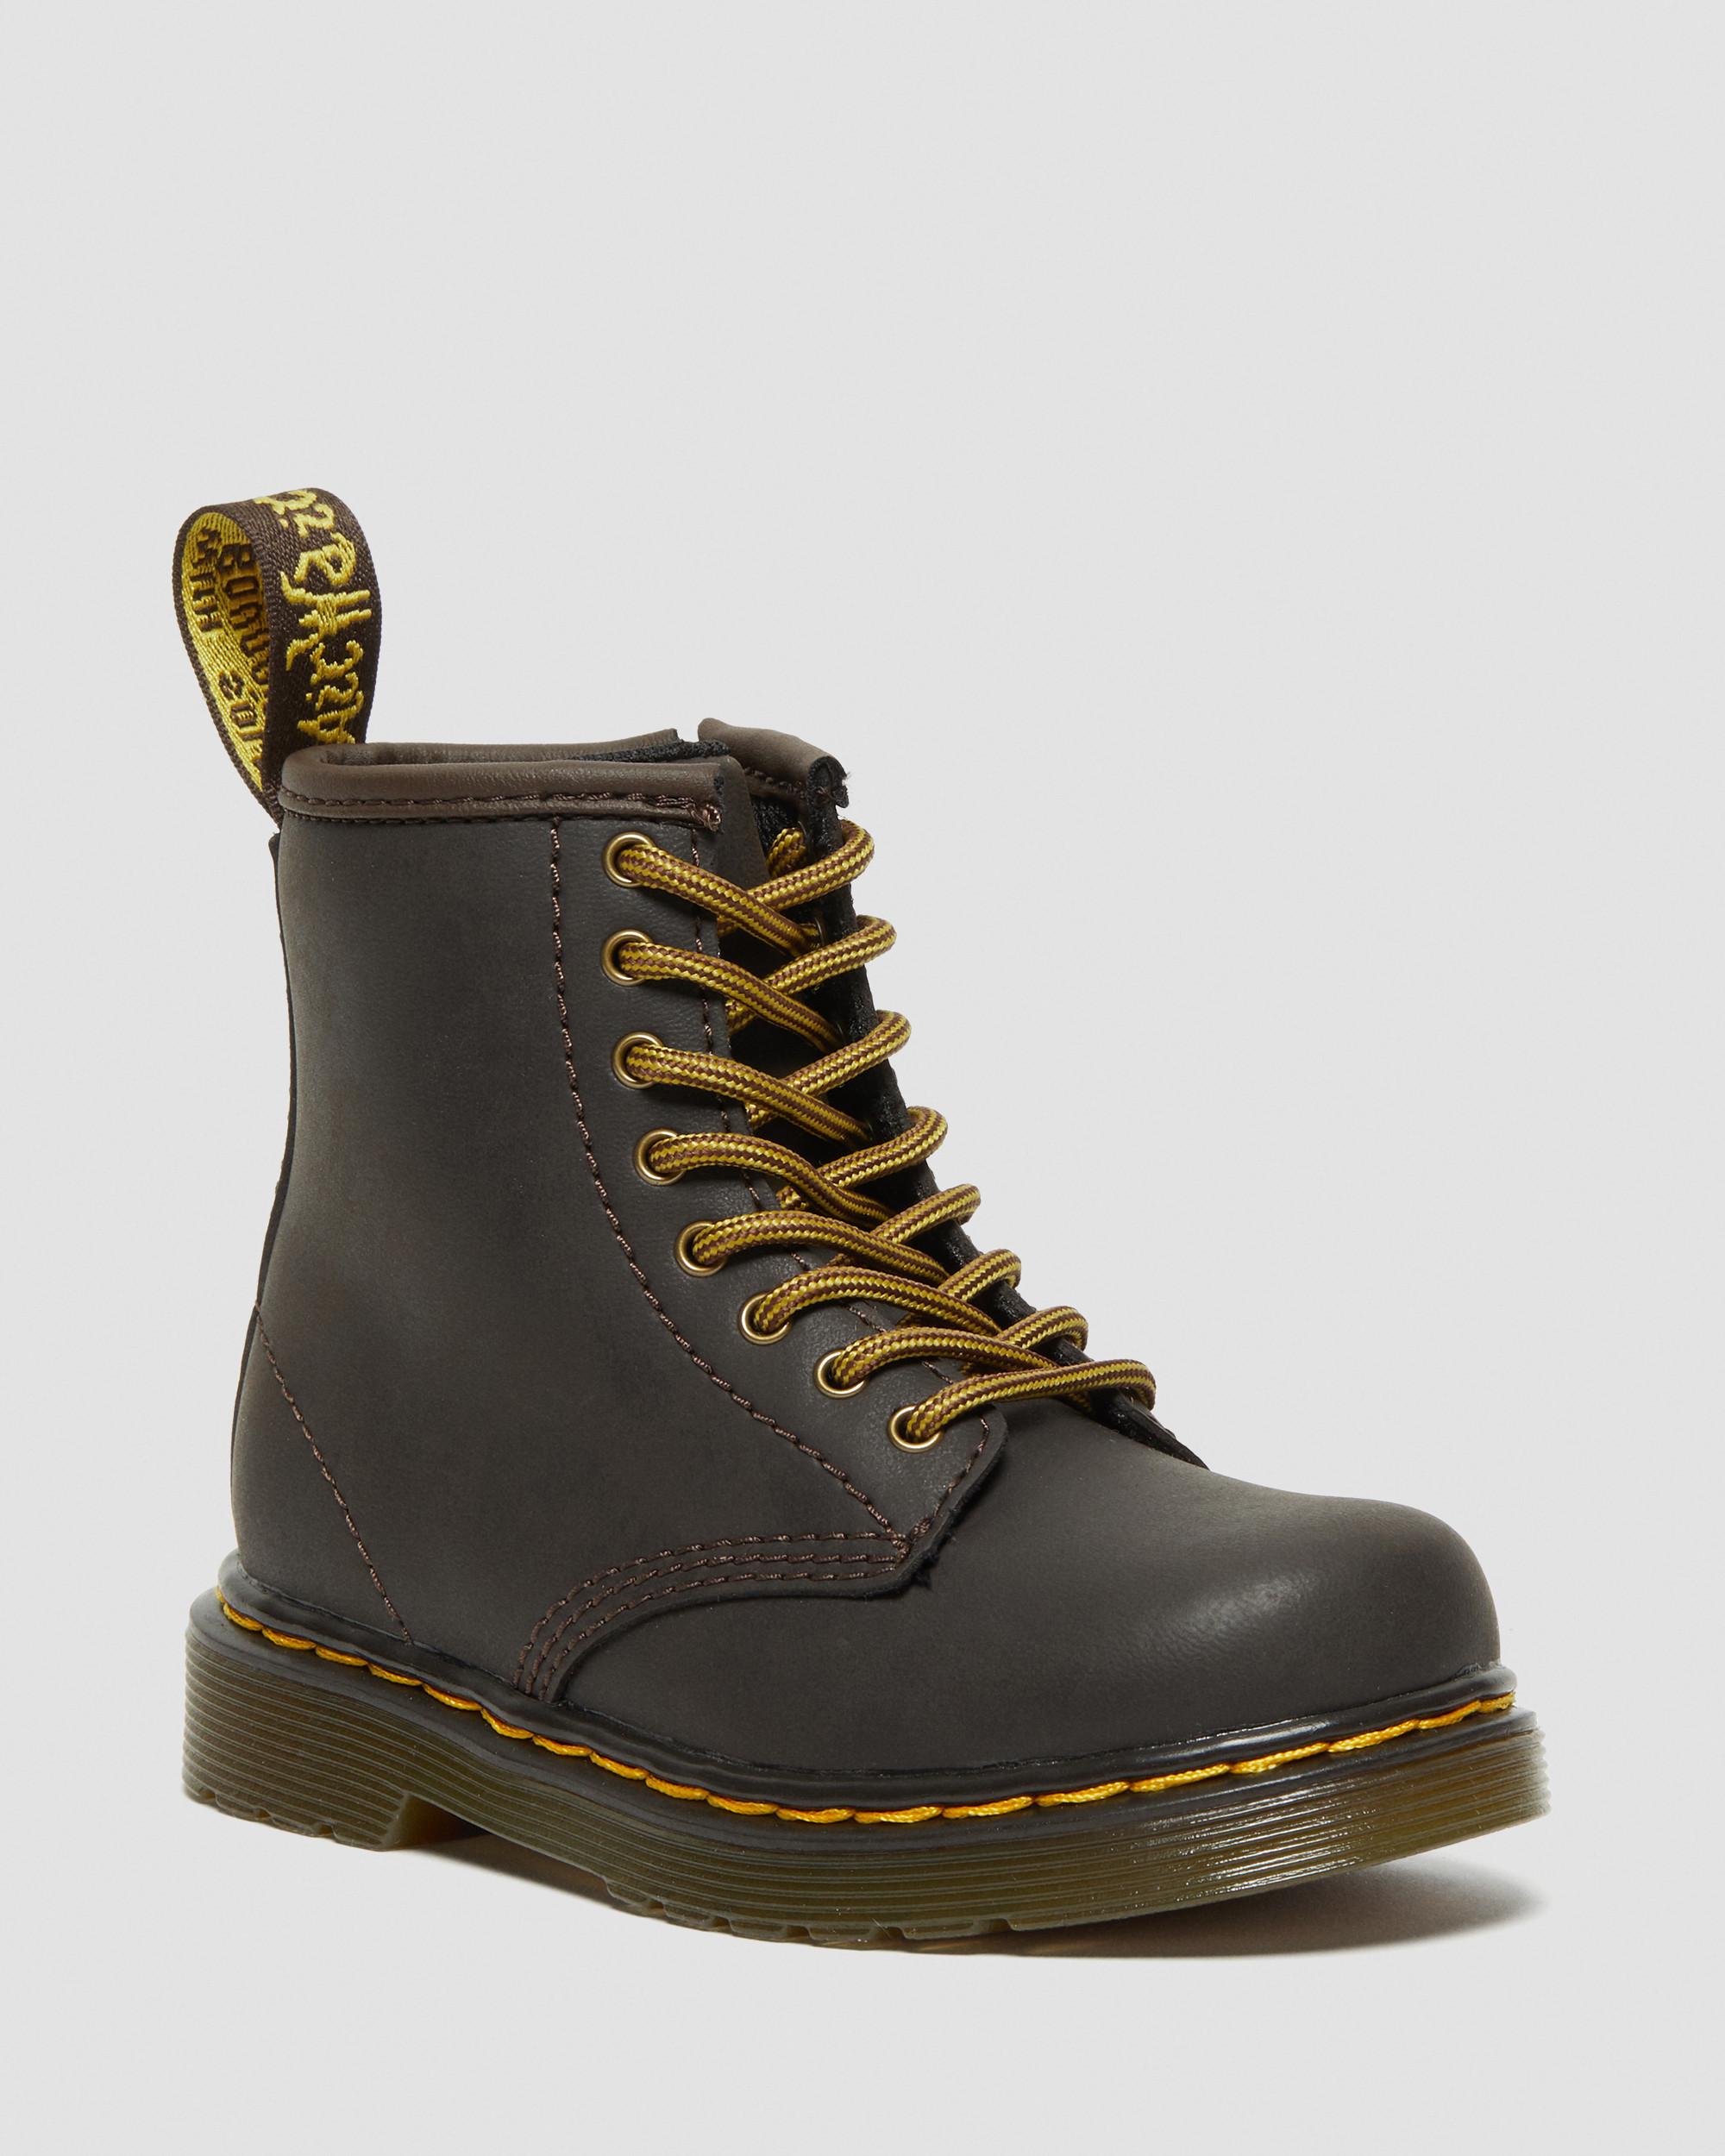 Youth Boots & Shoes | Kids Footwear | Dr. Martens